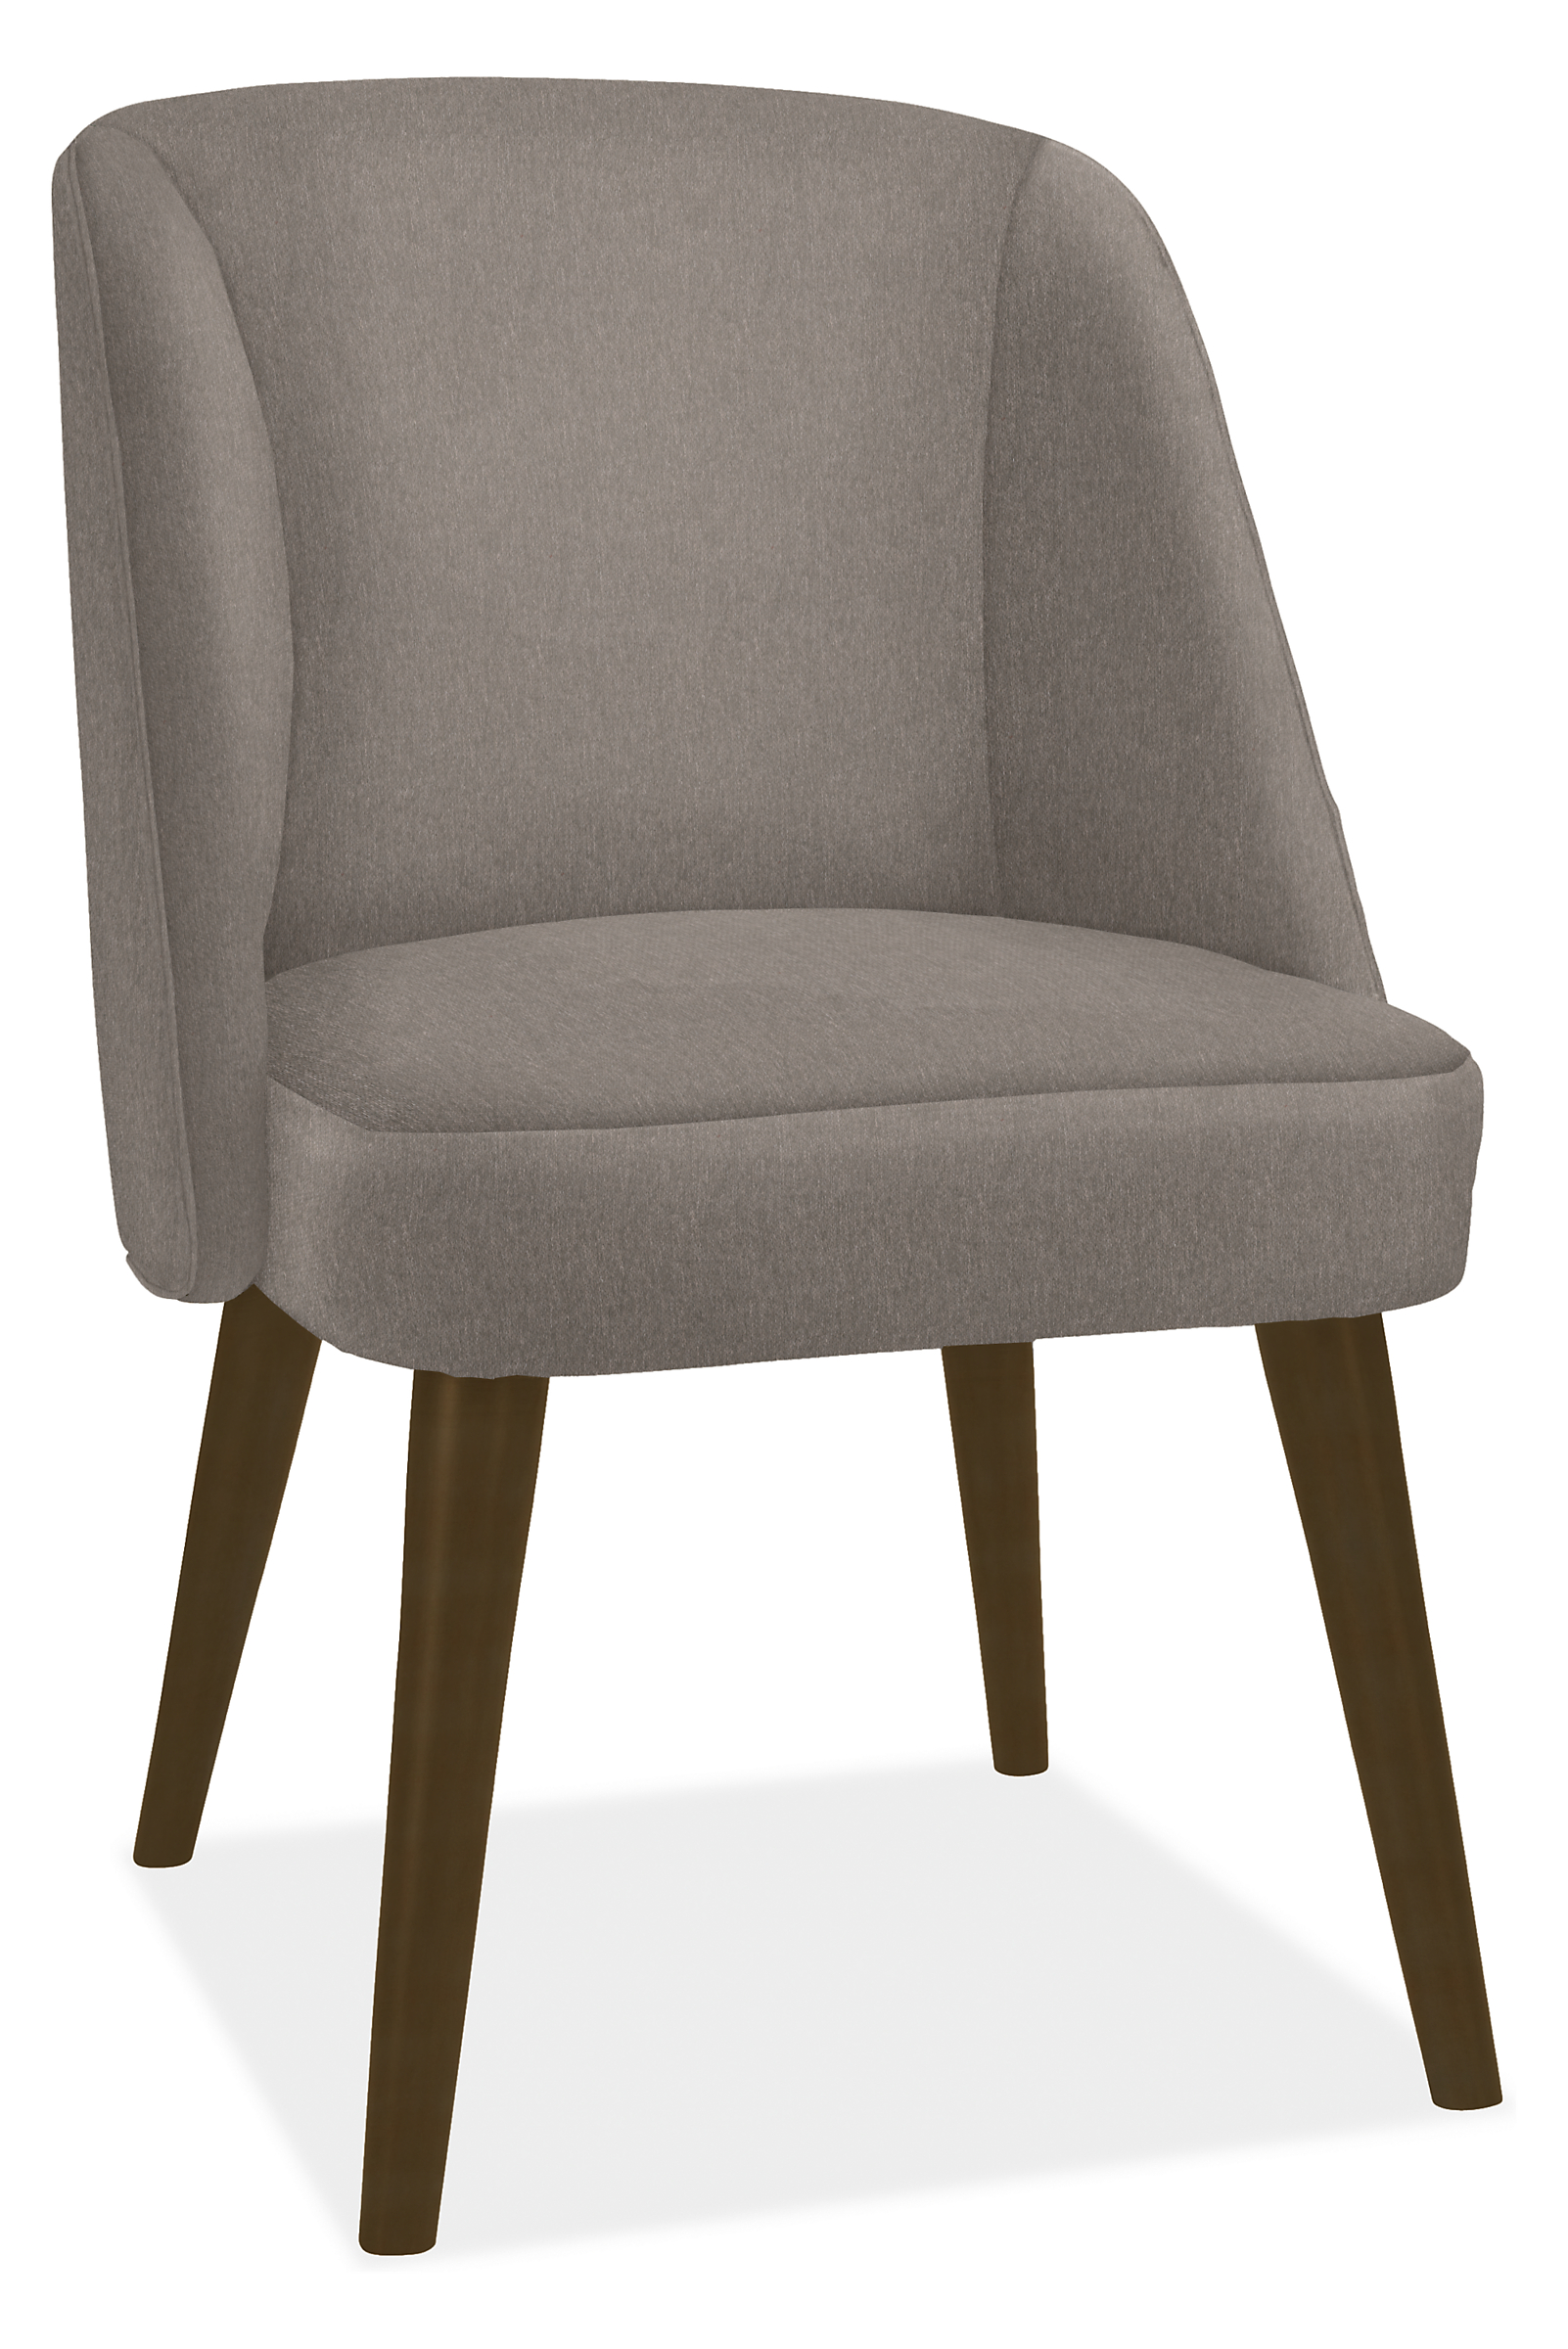 Cora Side Chair in Flint Grey with Charcoal Legs